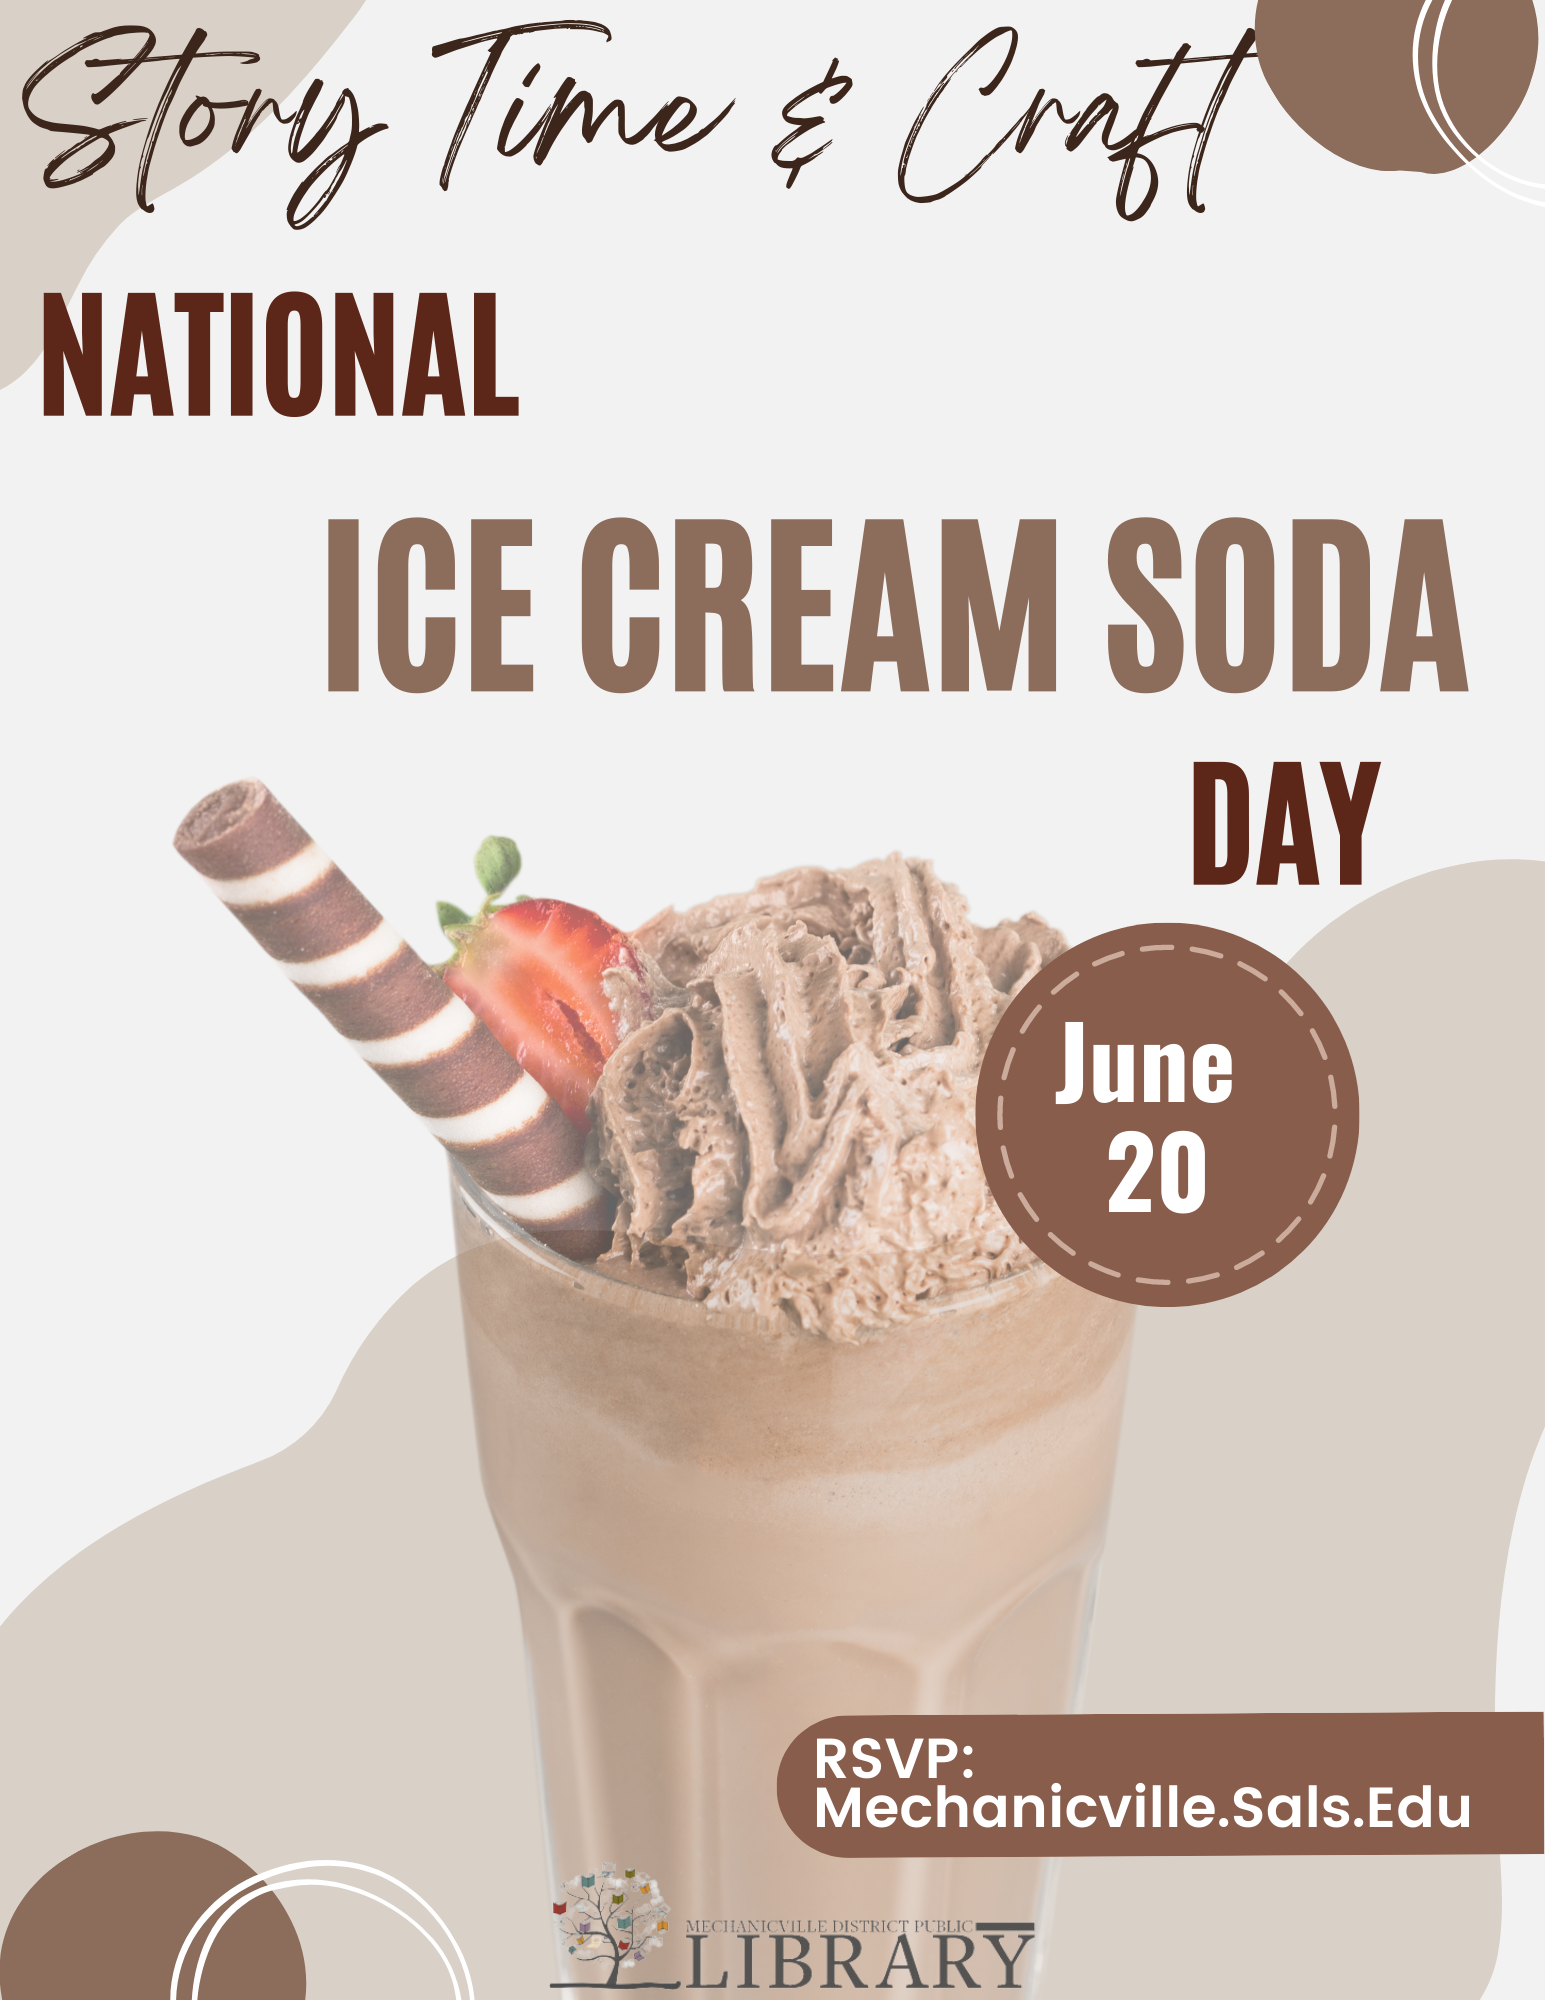 Story Time & Craft: National Ice Cream Soda Day! @ Mechanicville District Public Library